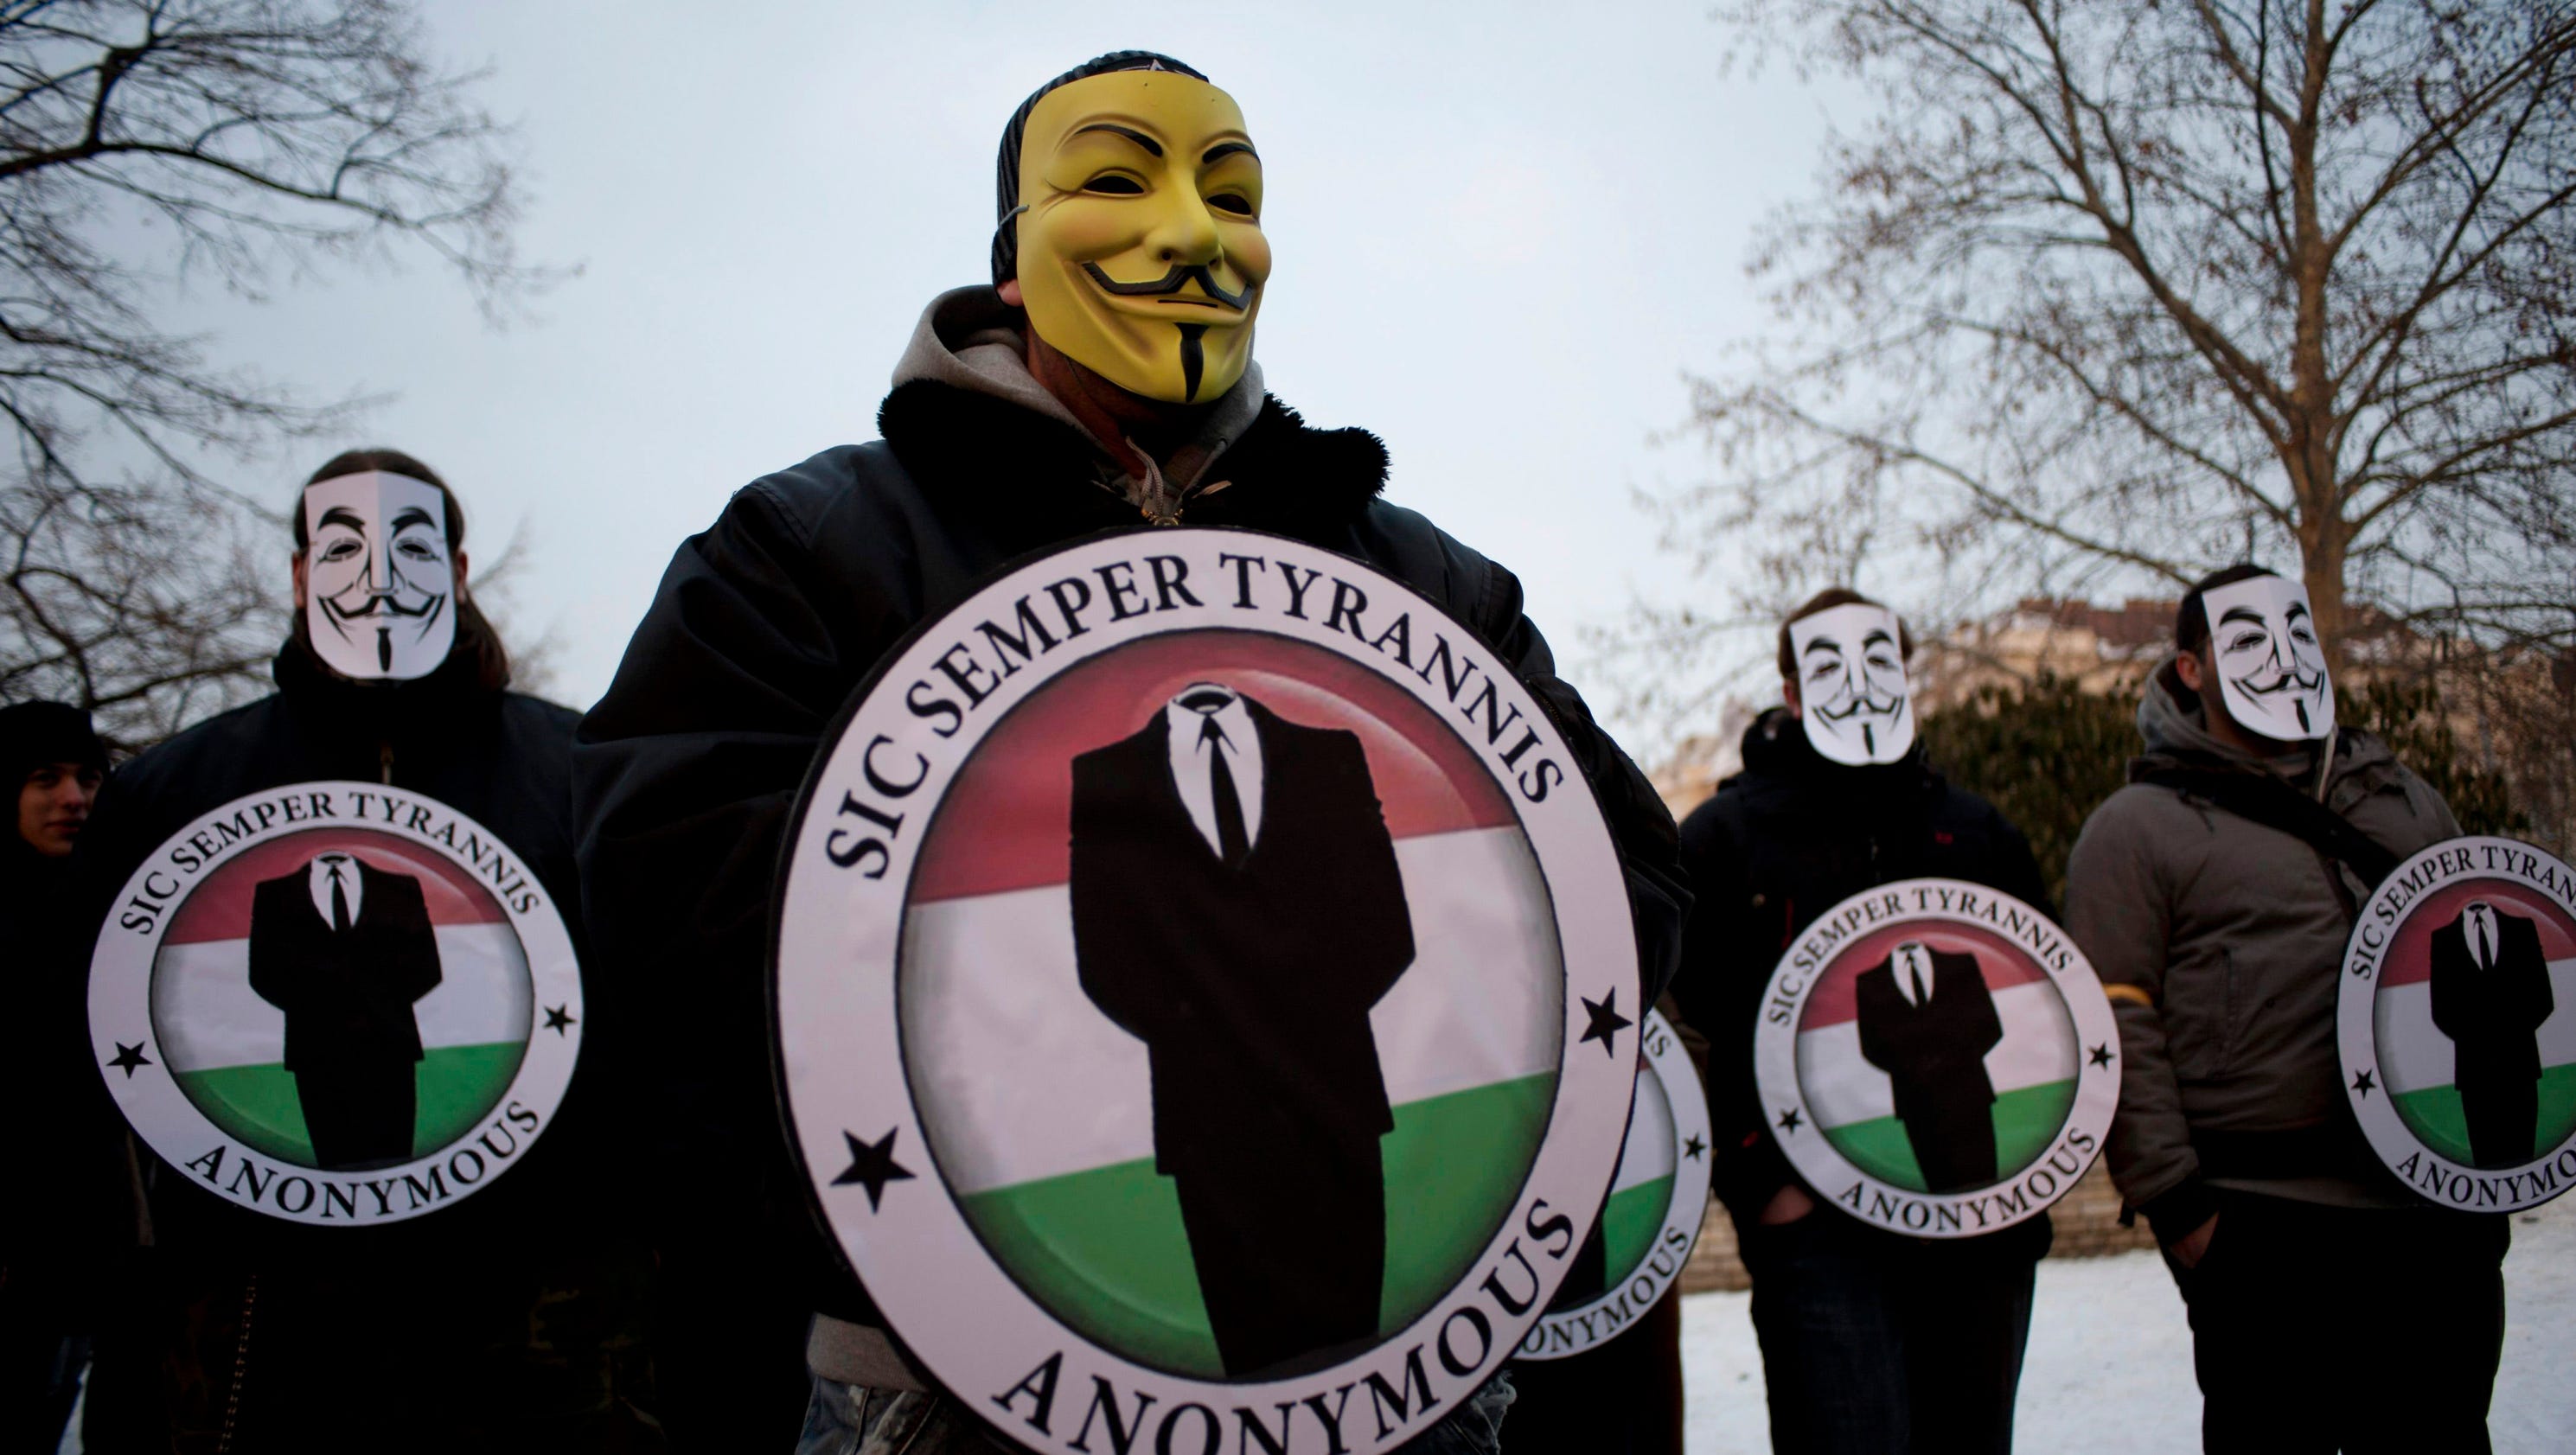 Who or what is the hacktivist group Anonymous?